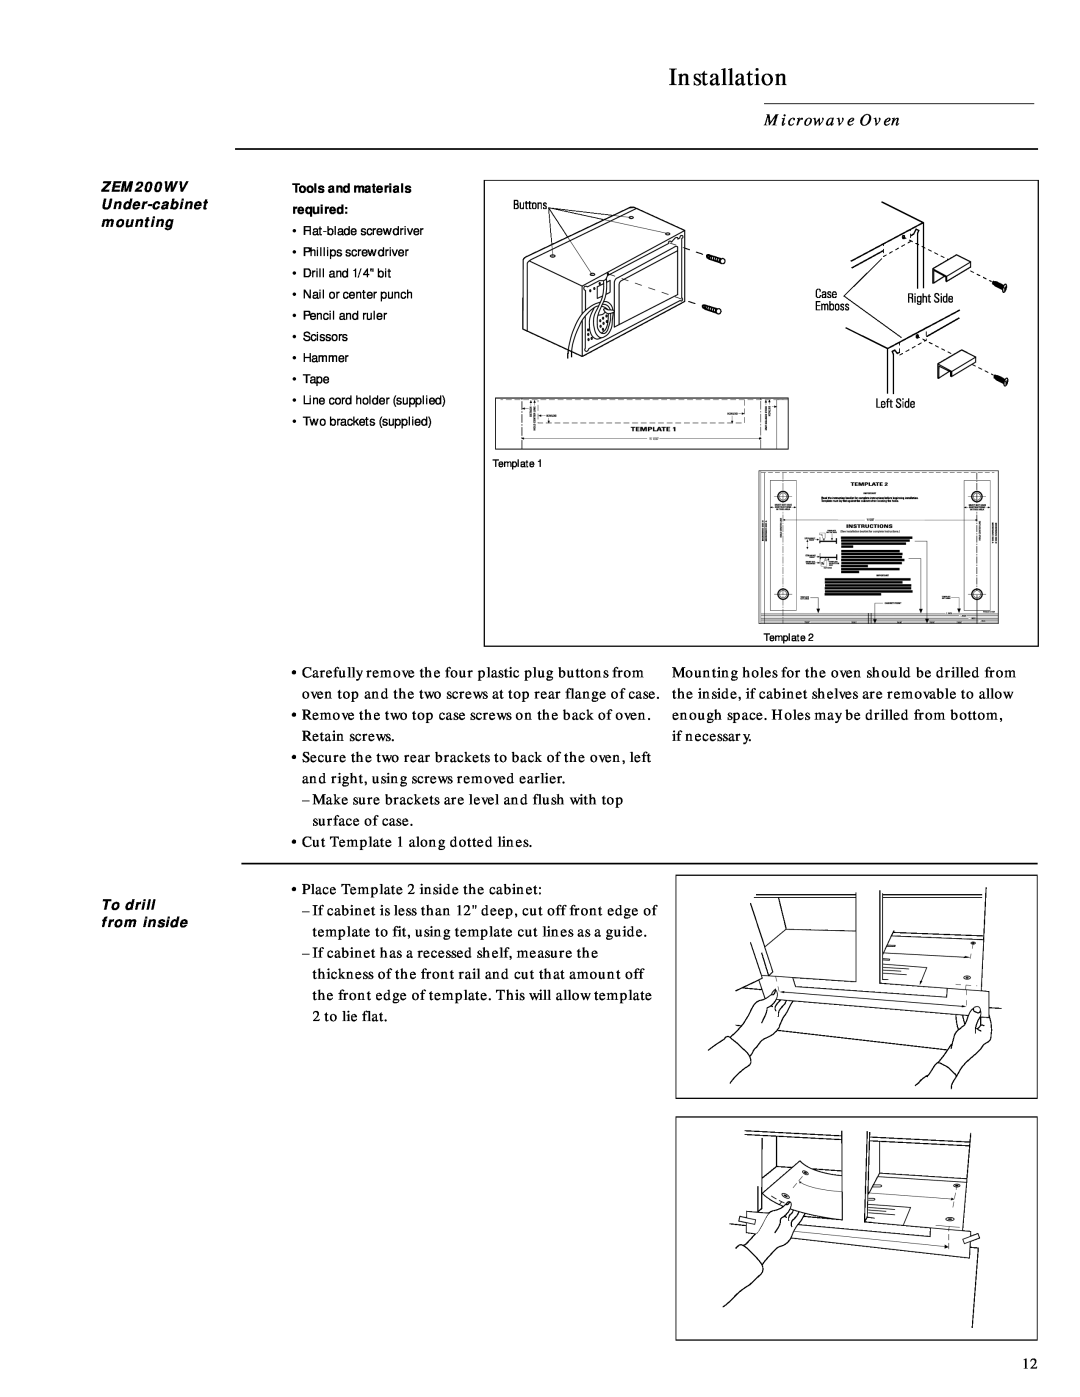 GE Monogram installation instructions Installation, Microwave Oven, ZEM200WV Under-cabinetmounting, To drill from inside 